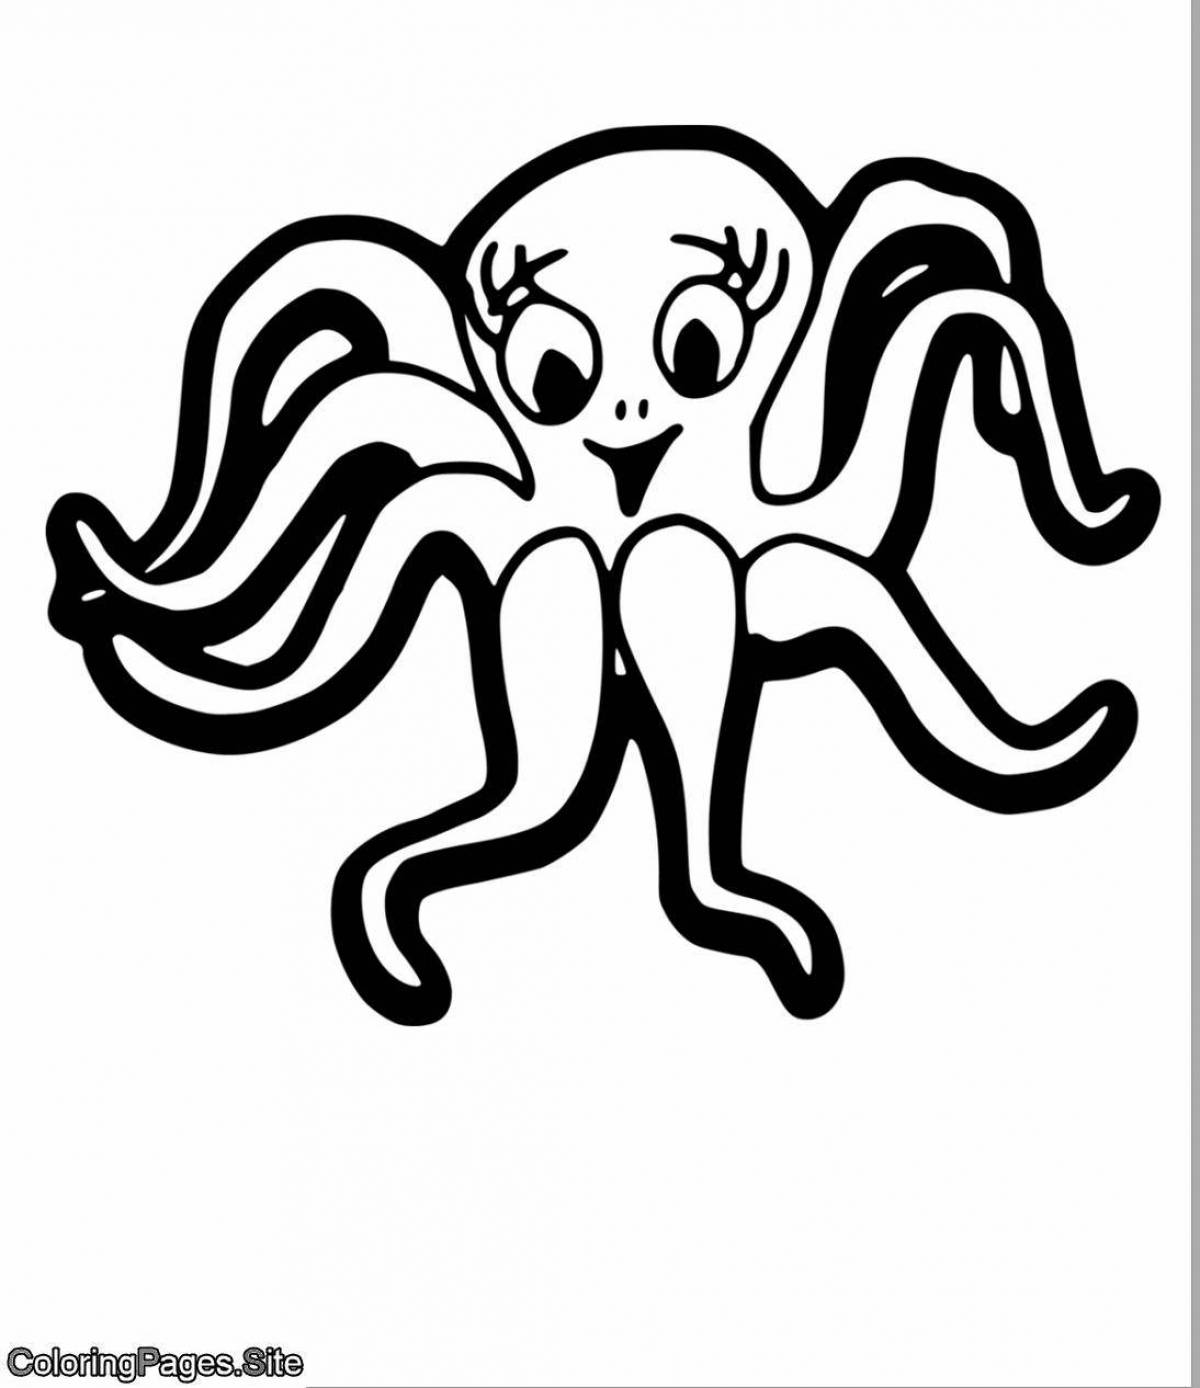 Adorable changeling octopus coloring book